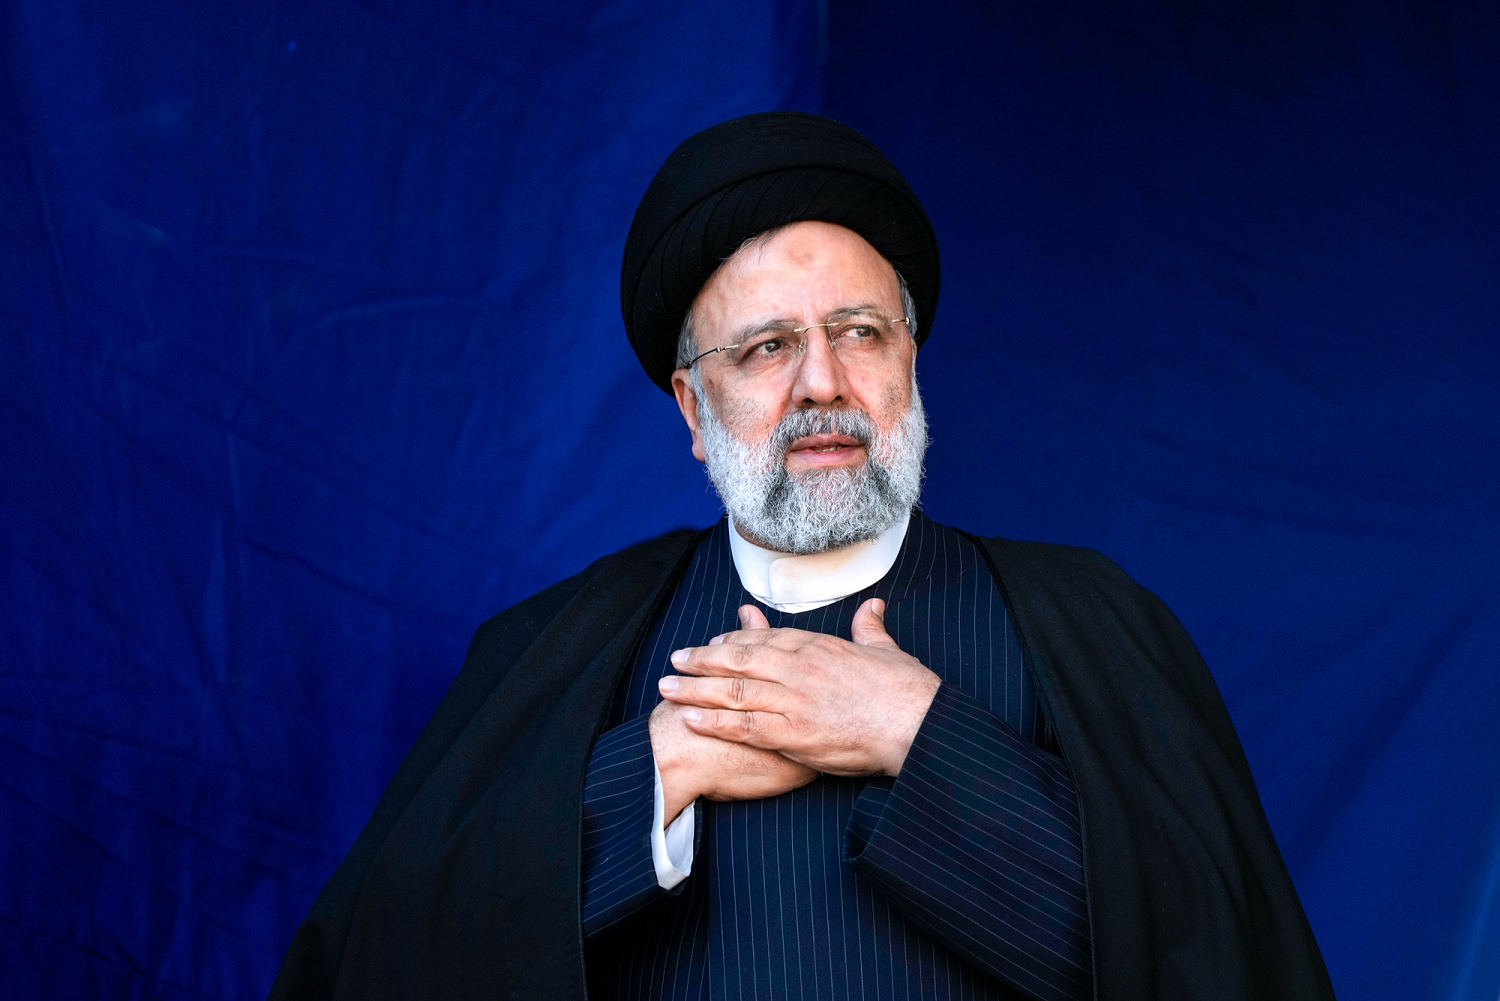 Iranian President Ebrahim Raisi is confirmed dead in helicopter crash, state media reports